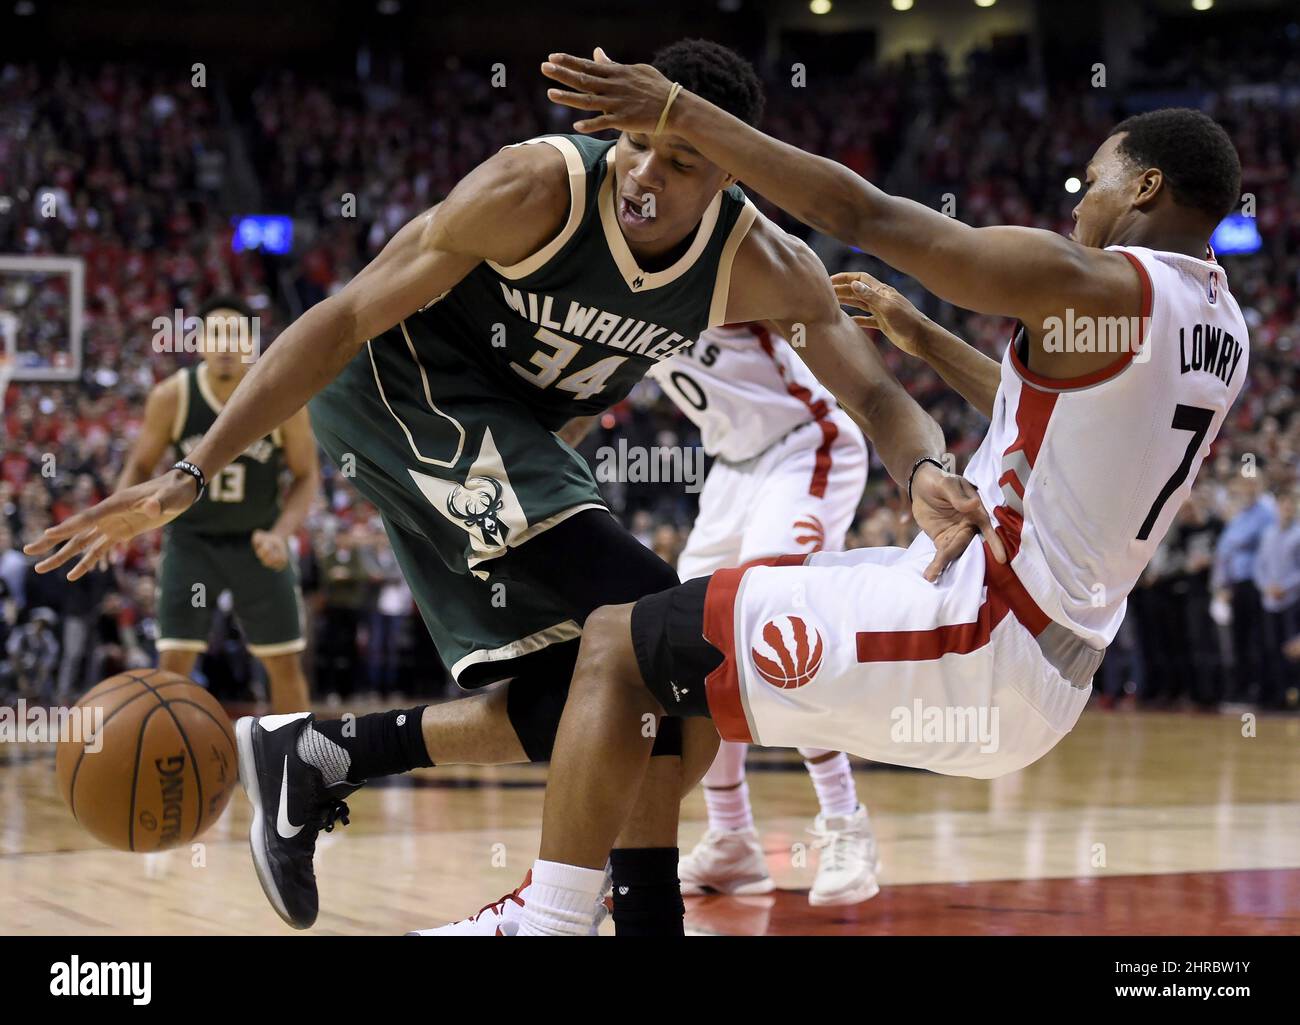 Toronto Raptors guard Kyle Lowry (7) goes down as Milwaukee Bucks forward Giannis Antetokounmpo (34) drives during the second half of Game 2 of an NBA basketball first-round playoff series, Tuesday, April